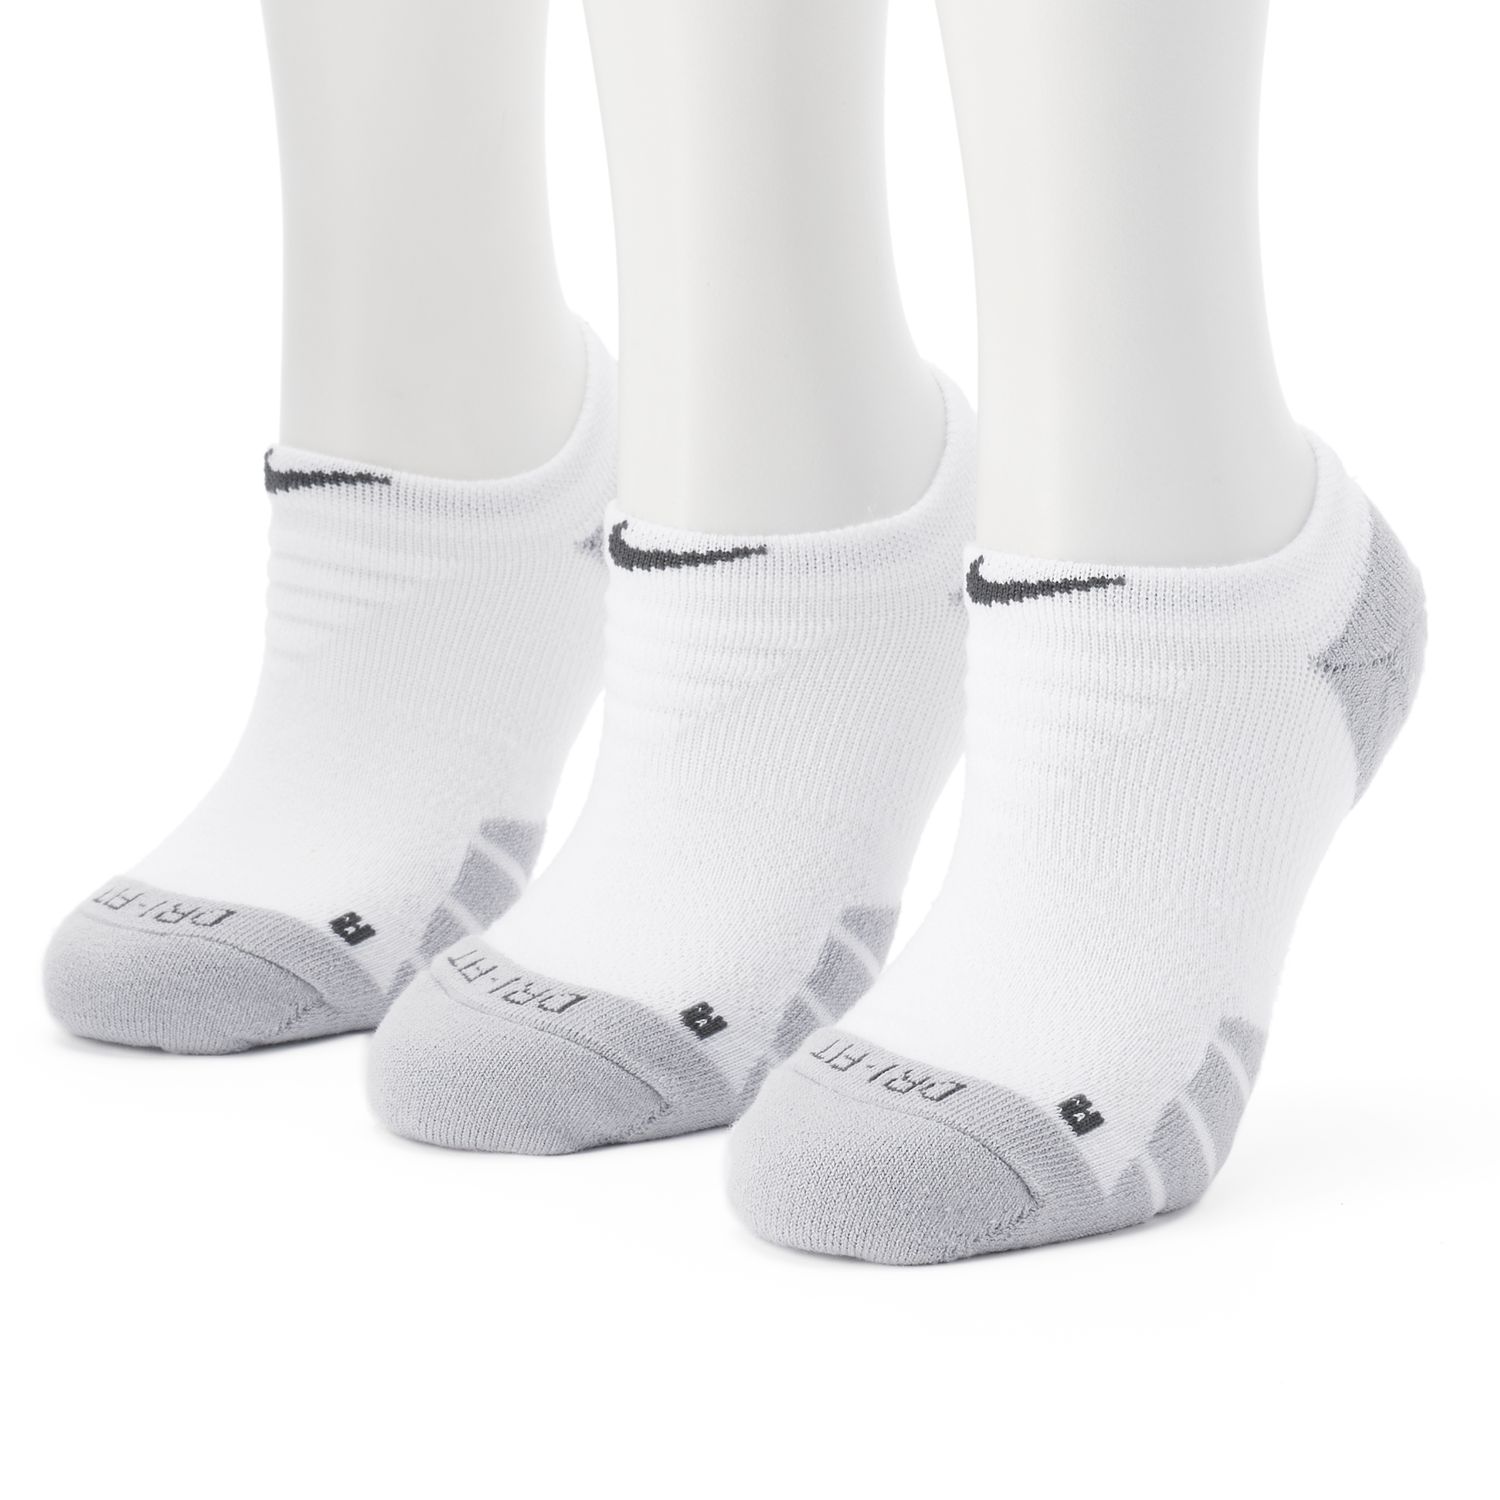 socks with left and right written on them nike